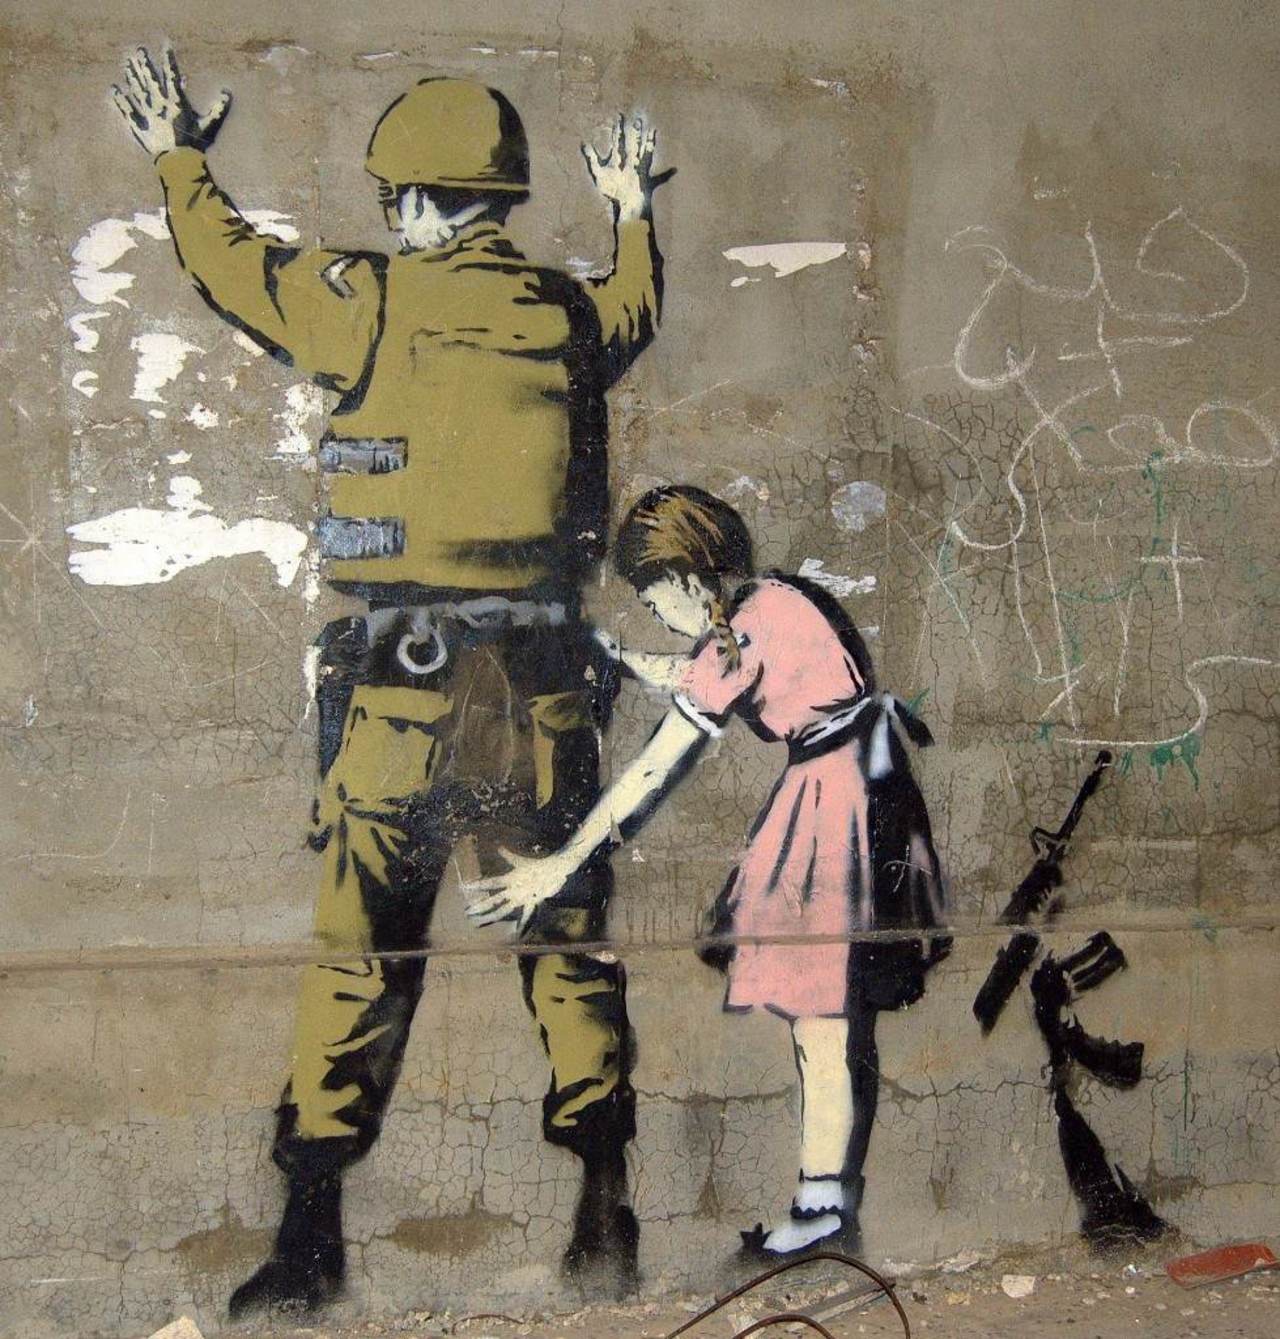 Who is #Bansky? – #Streetart – Be ▲rtist – Be ▲rt Magazine https://beartistbeart.com/2016/09/02/who-is-bansky-streetart/?utm_campaign=crowdfire&utm_content=crowdfire&utm_medium=social&utm_source=twitter https://t.co/W1gFY0QY28